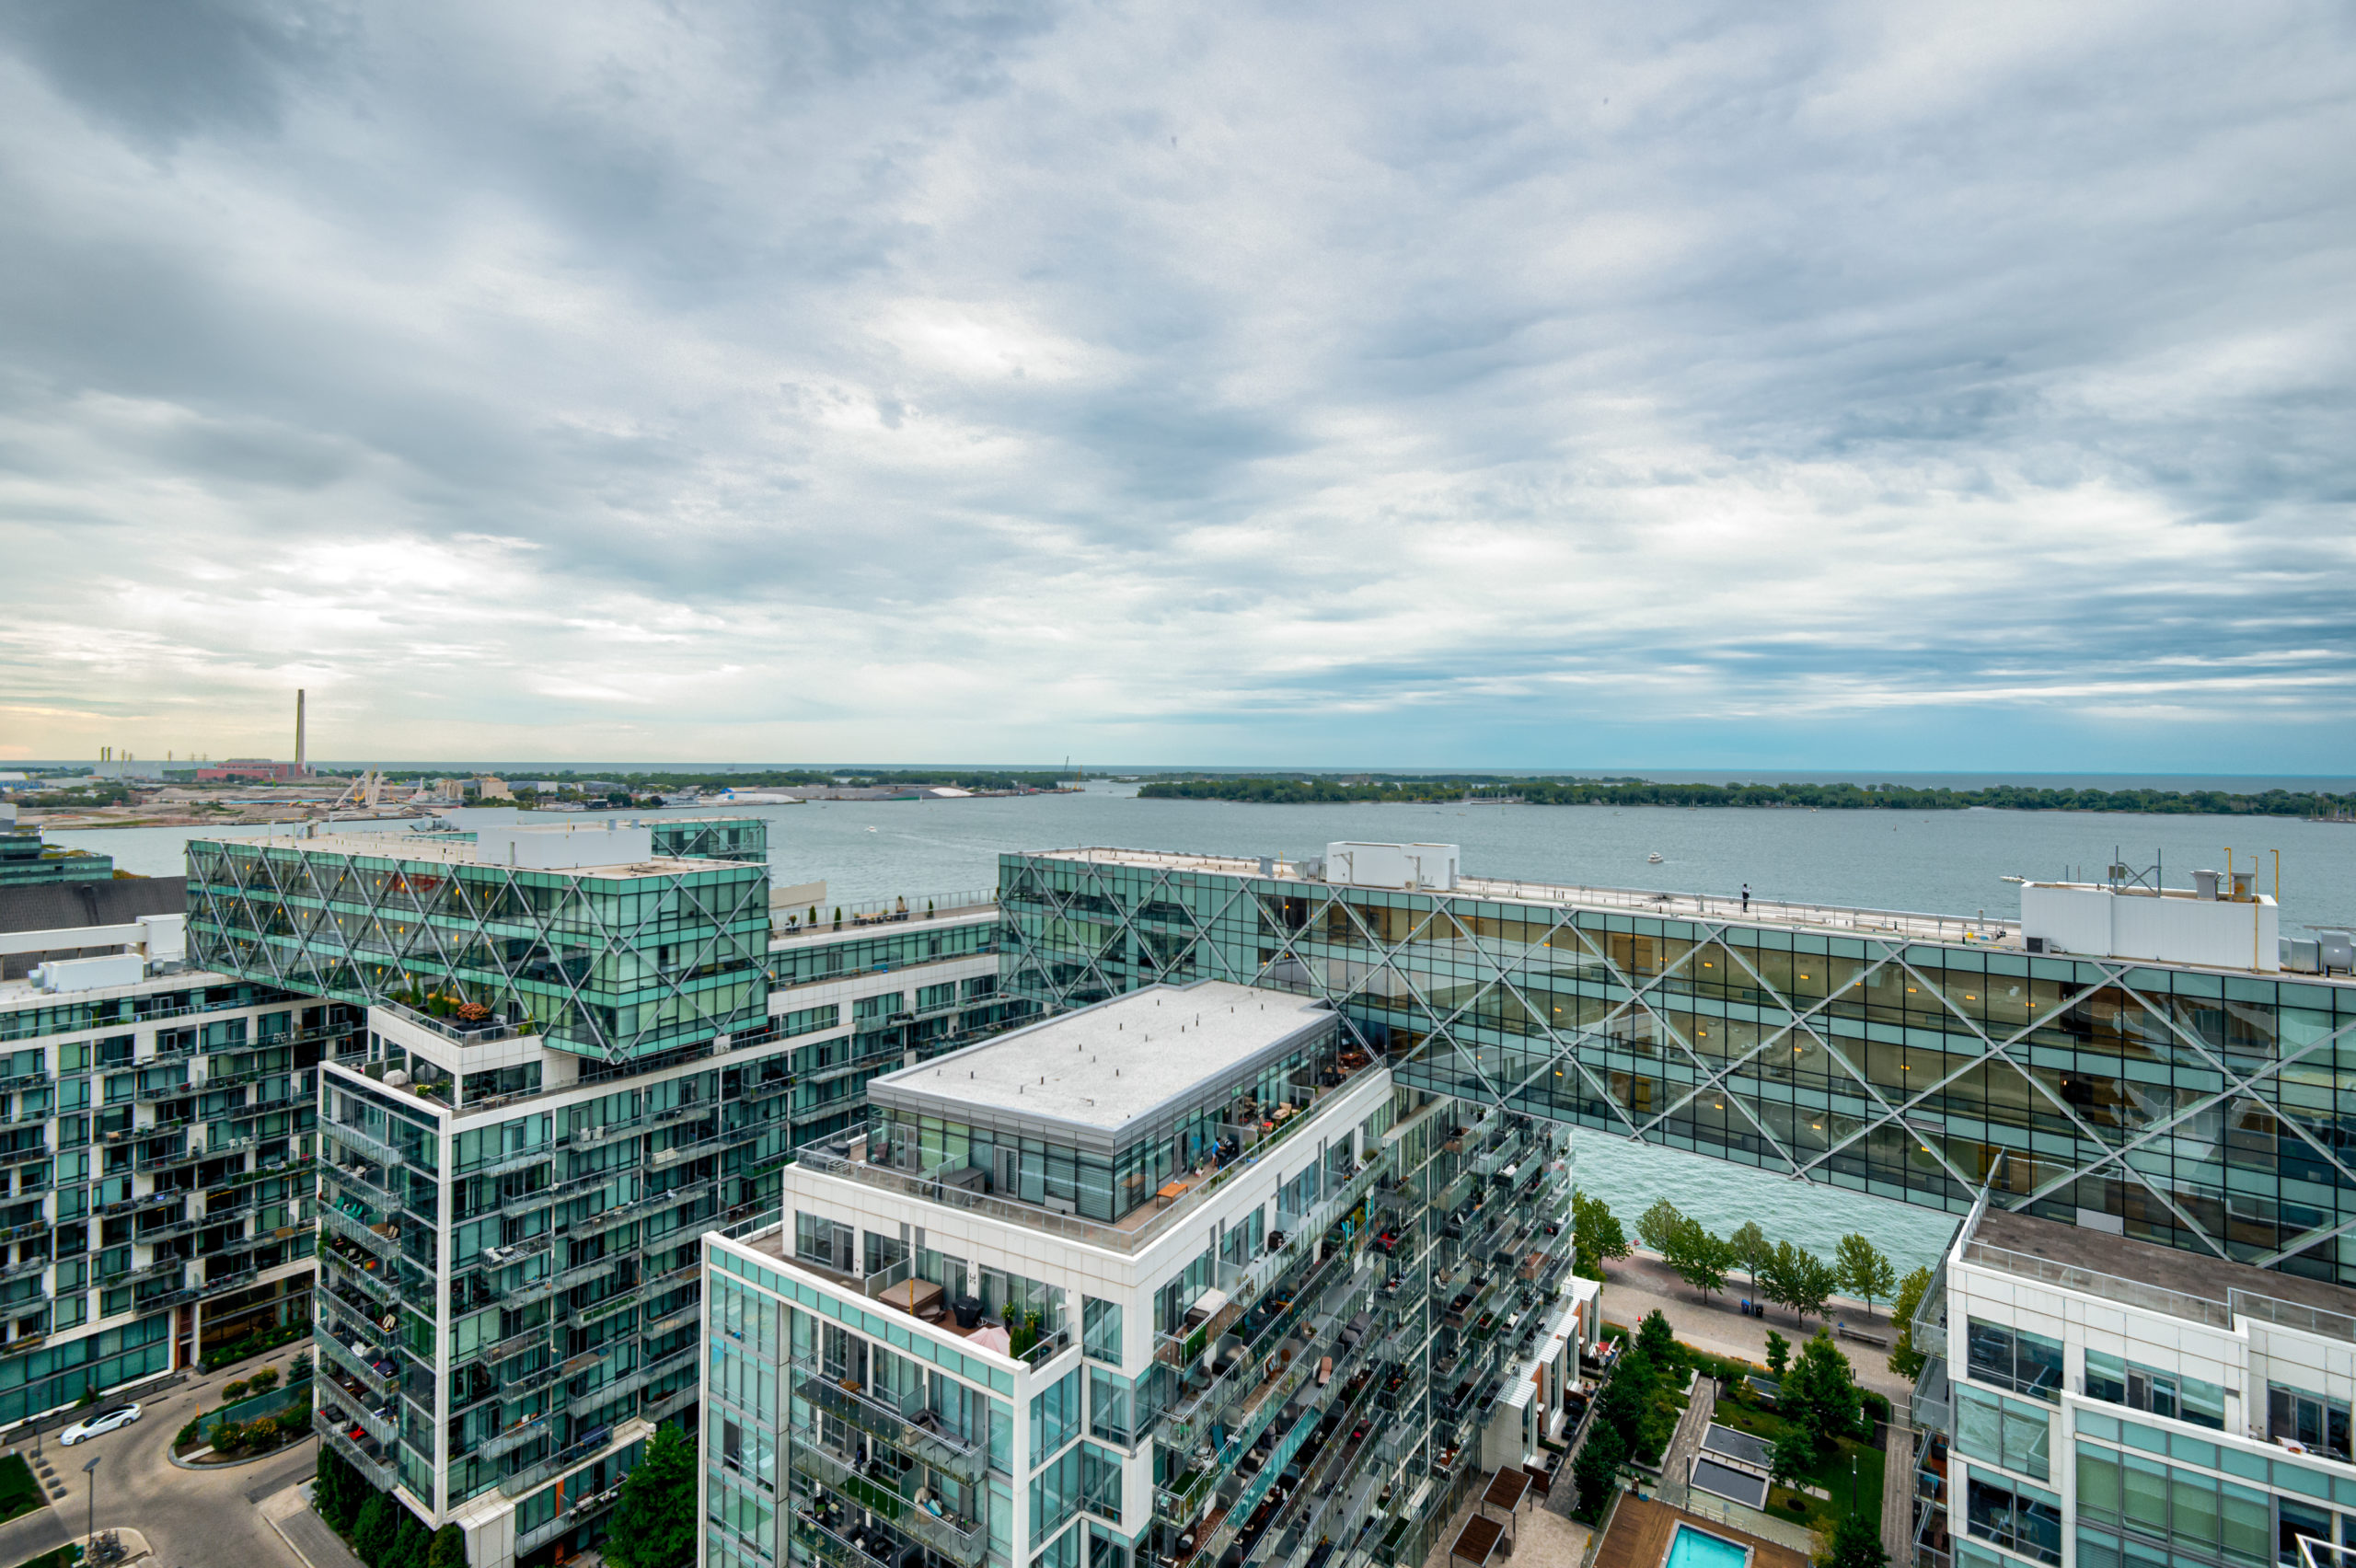 View of Toronto Waterfront and Lake Ontario from 15 Queens Quay E Unit 1901 balcony.